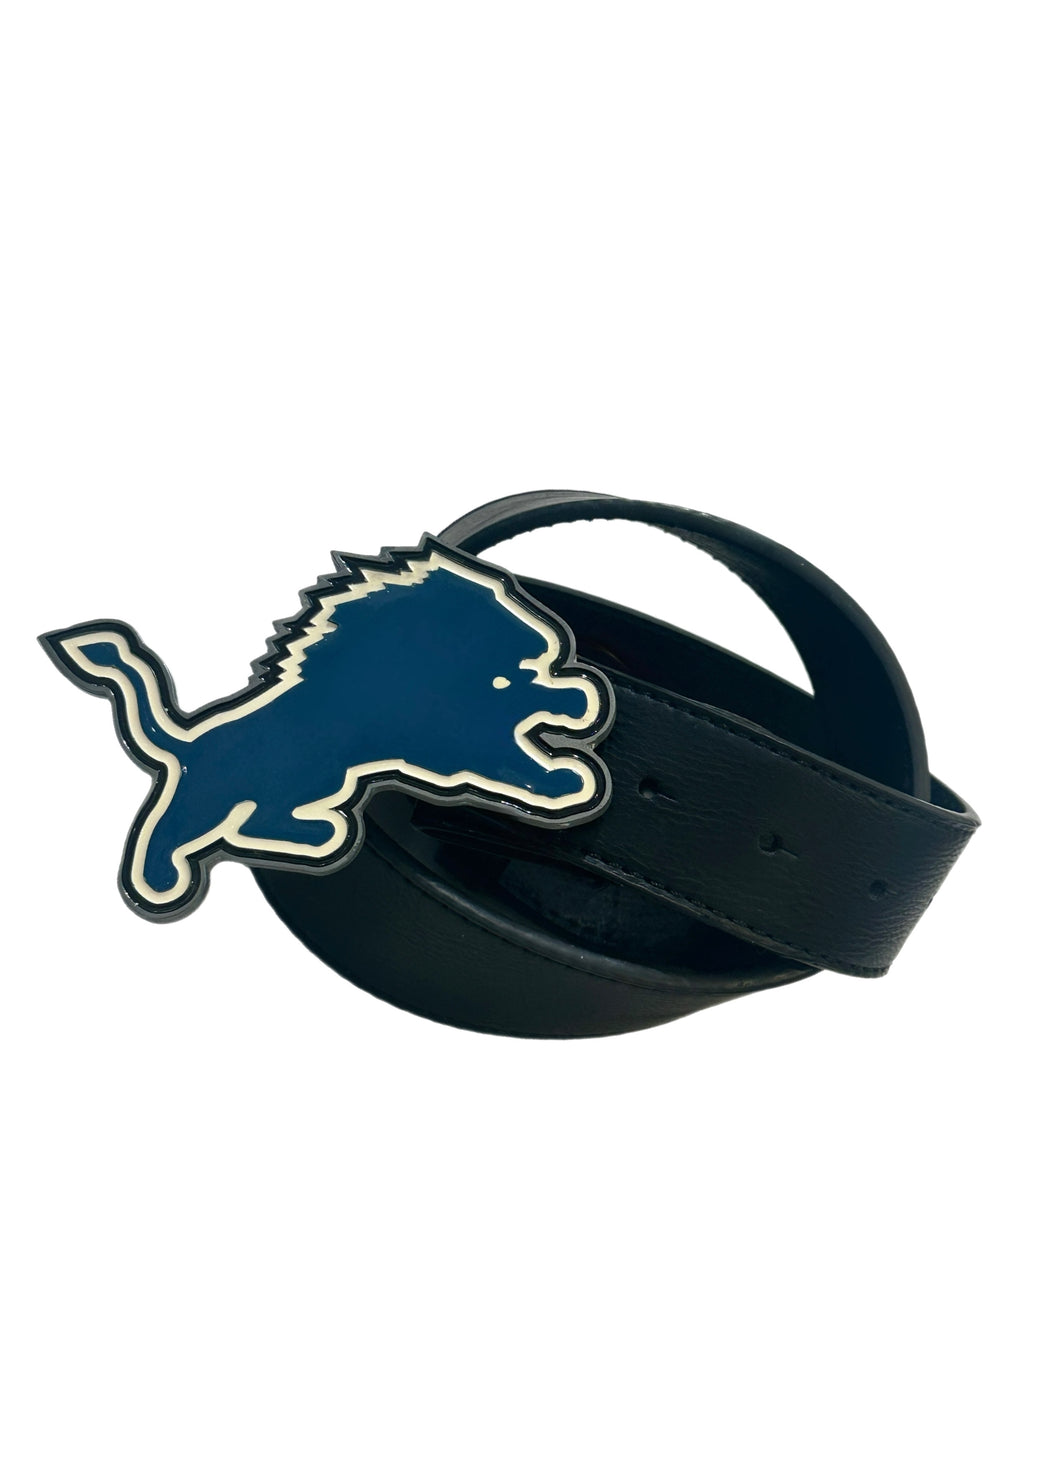 Detroit Lions, Football Vintage Belt Buckle with New Soft Leather Strap